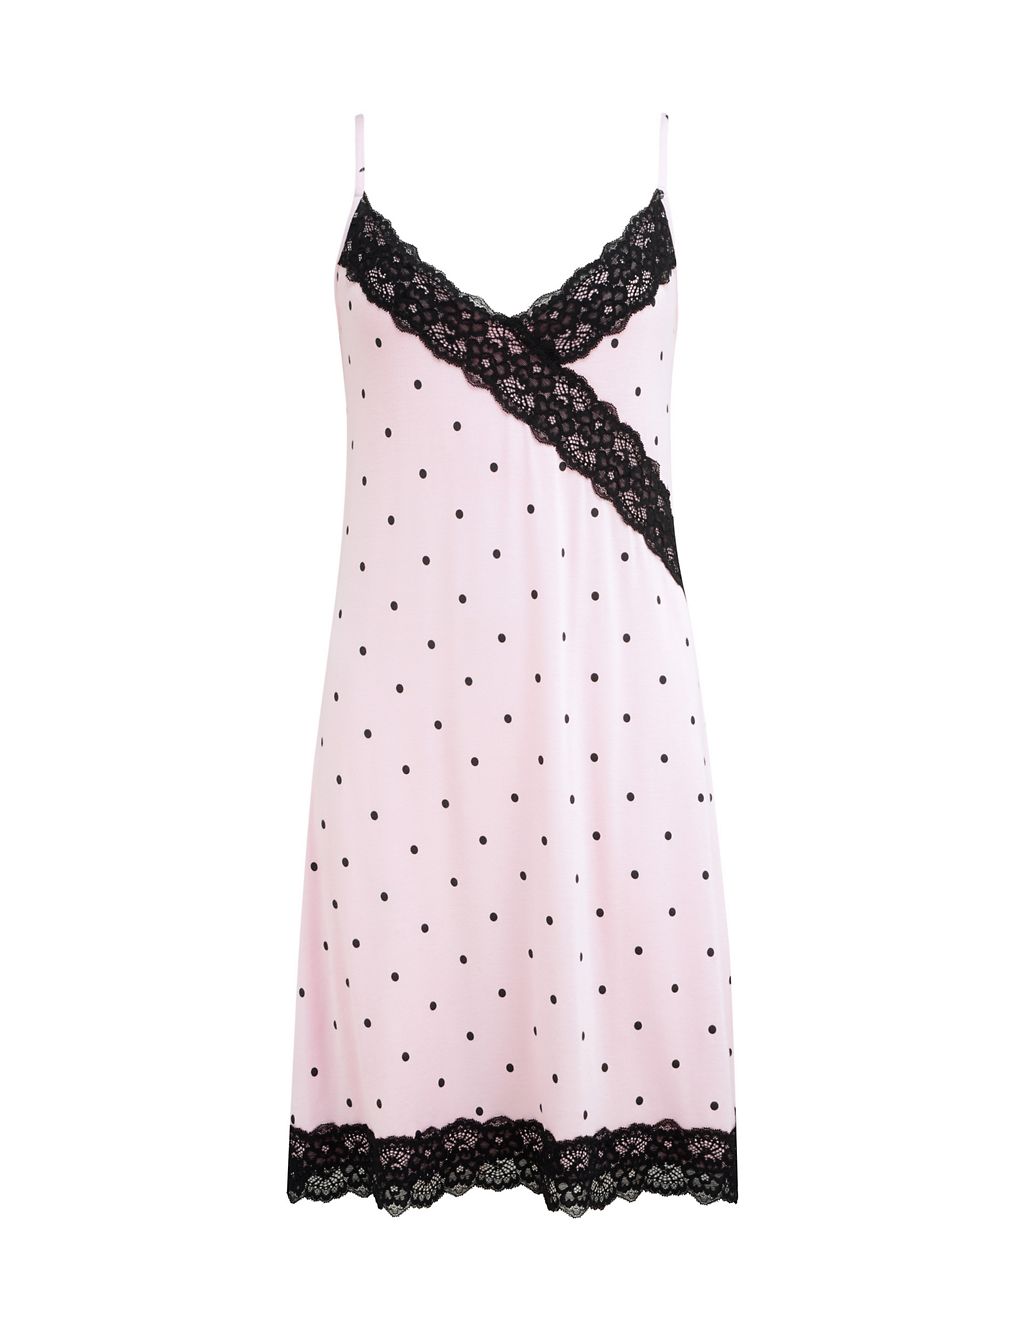 Sofa Loves Lace Jersey Polka Dot Hidden Support Chemise 1 of 5